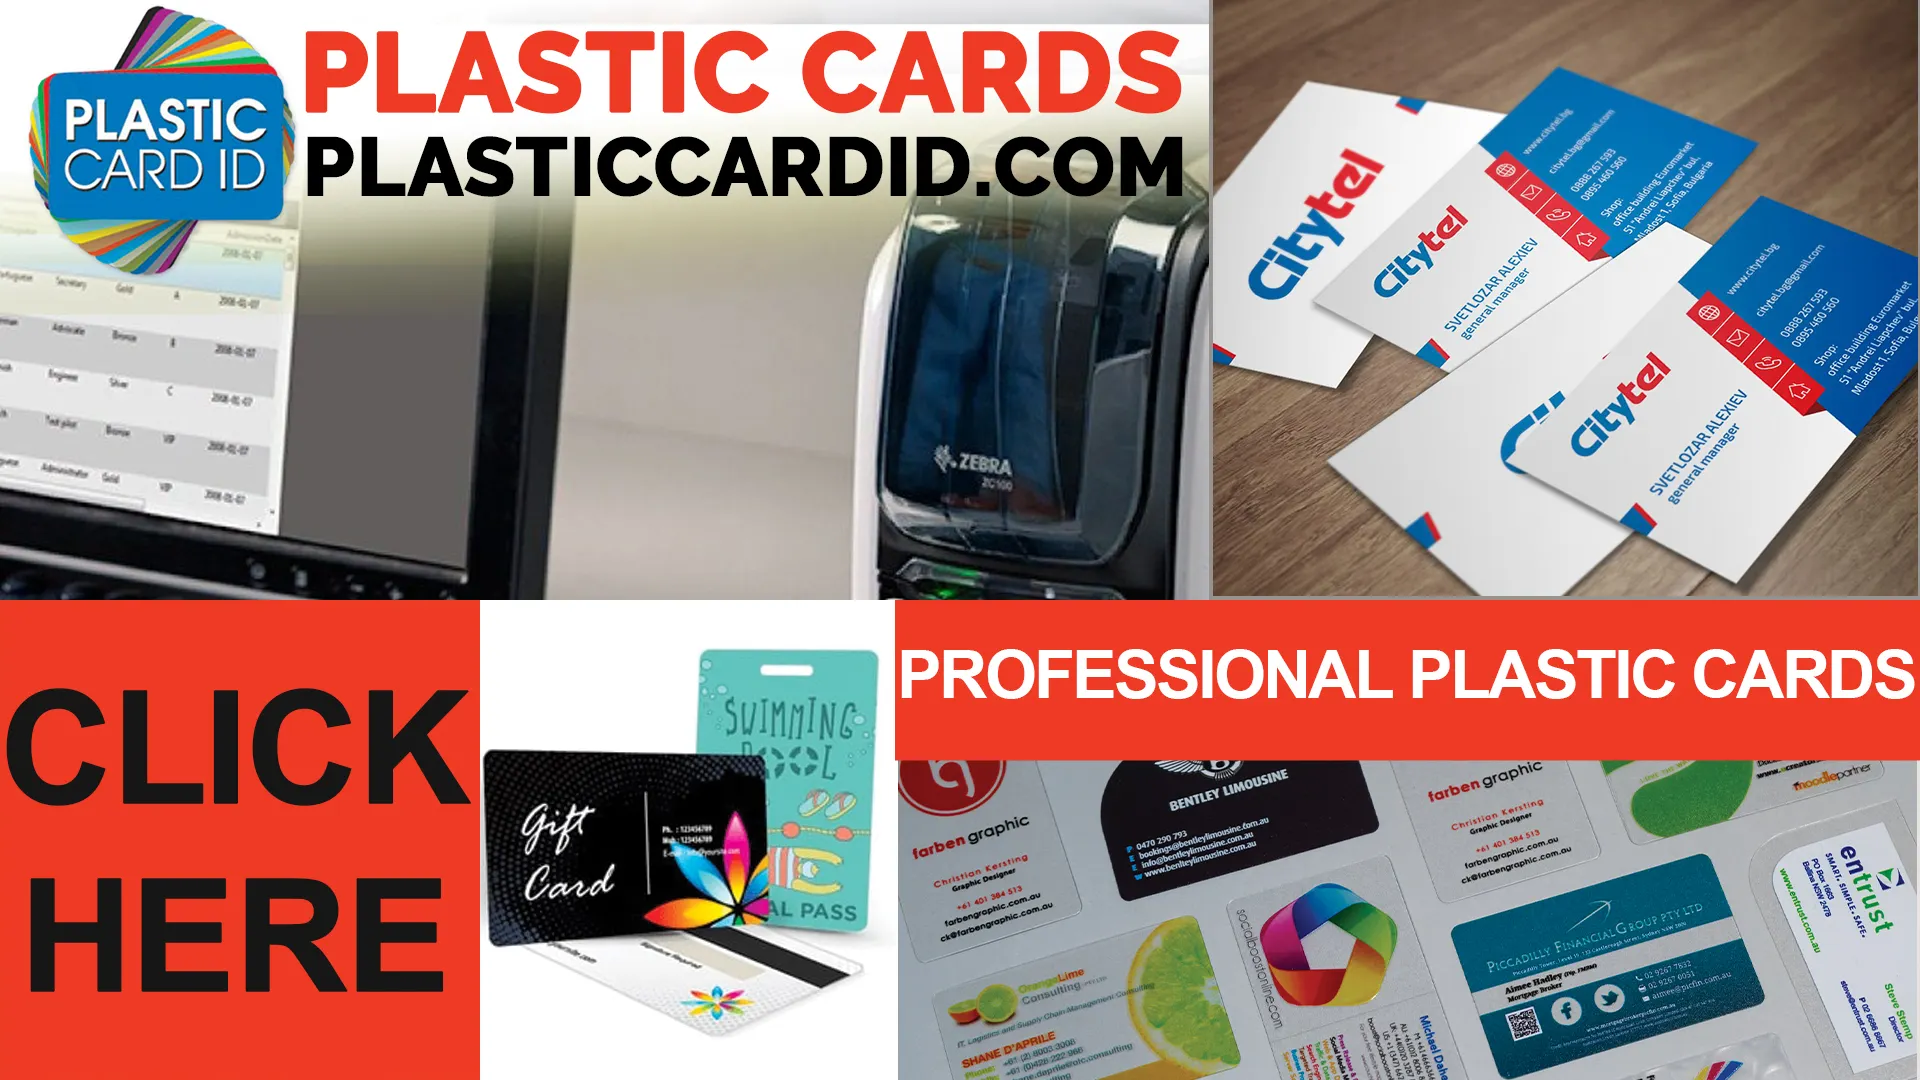 Making the Most of Your Card Printer